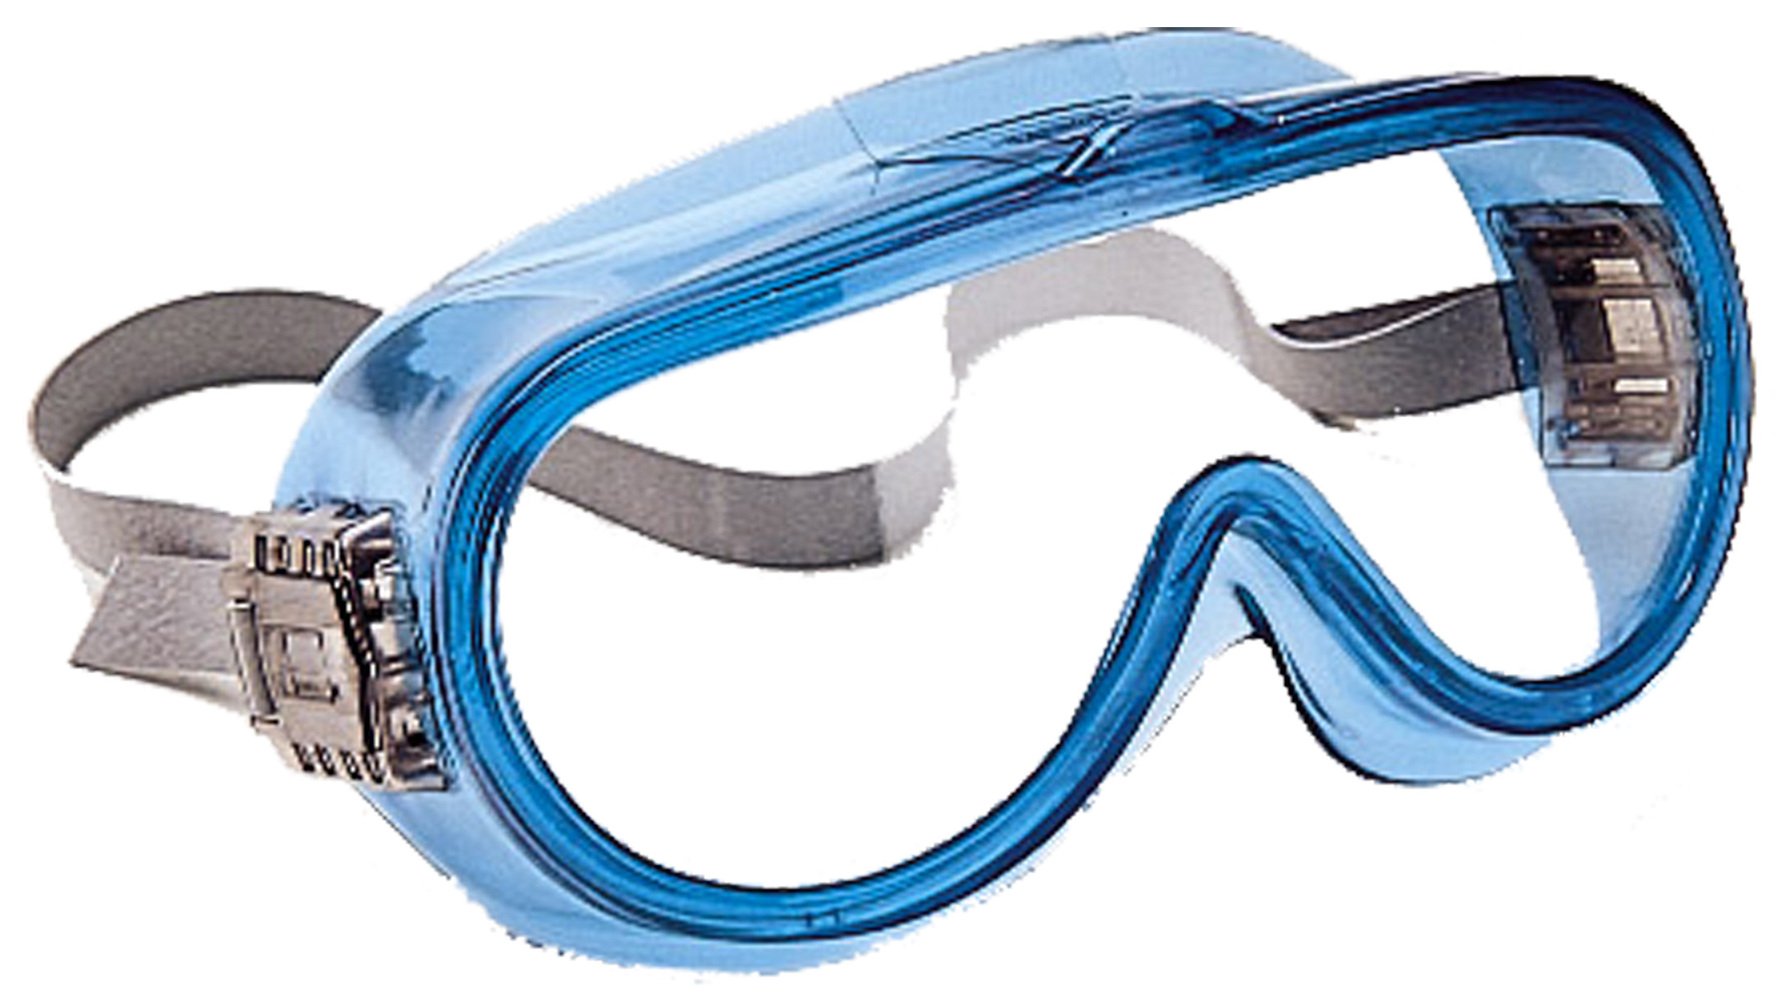 KleenGuard™ V80 MXRV Safety Goggles (16677), Unventilated for Splash Protection, Clear Lens, Anti-Fog, Blue Frame, 36 Pairs / Case - 16677